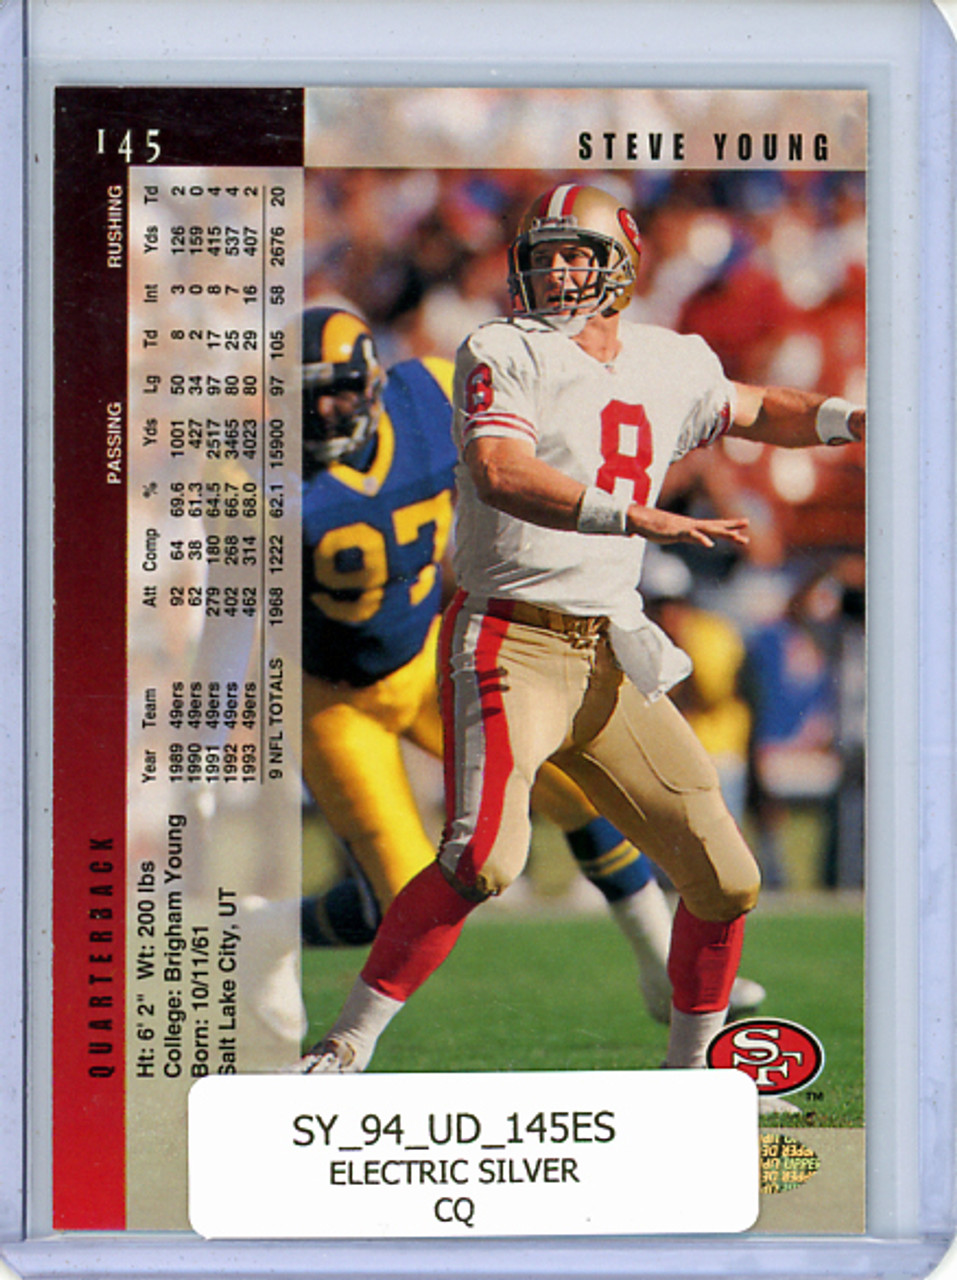 Steve Young 1994 Upper Deck #145 Electric Silver (CQ)